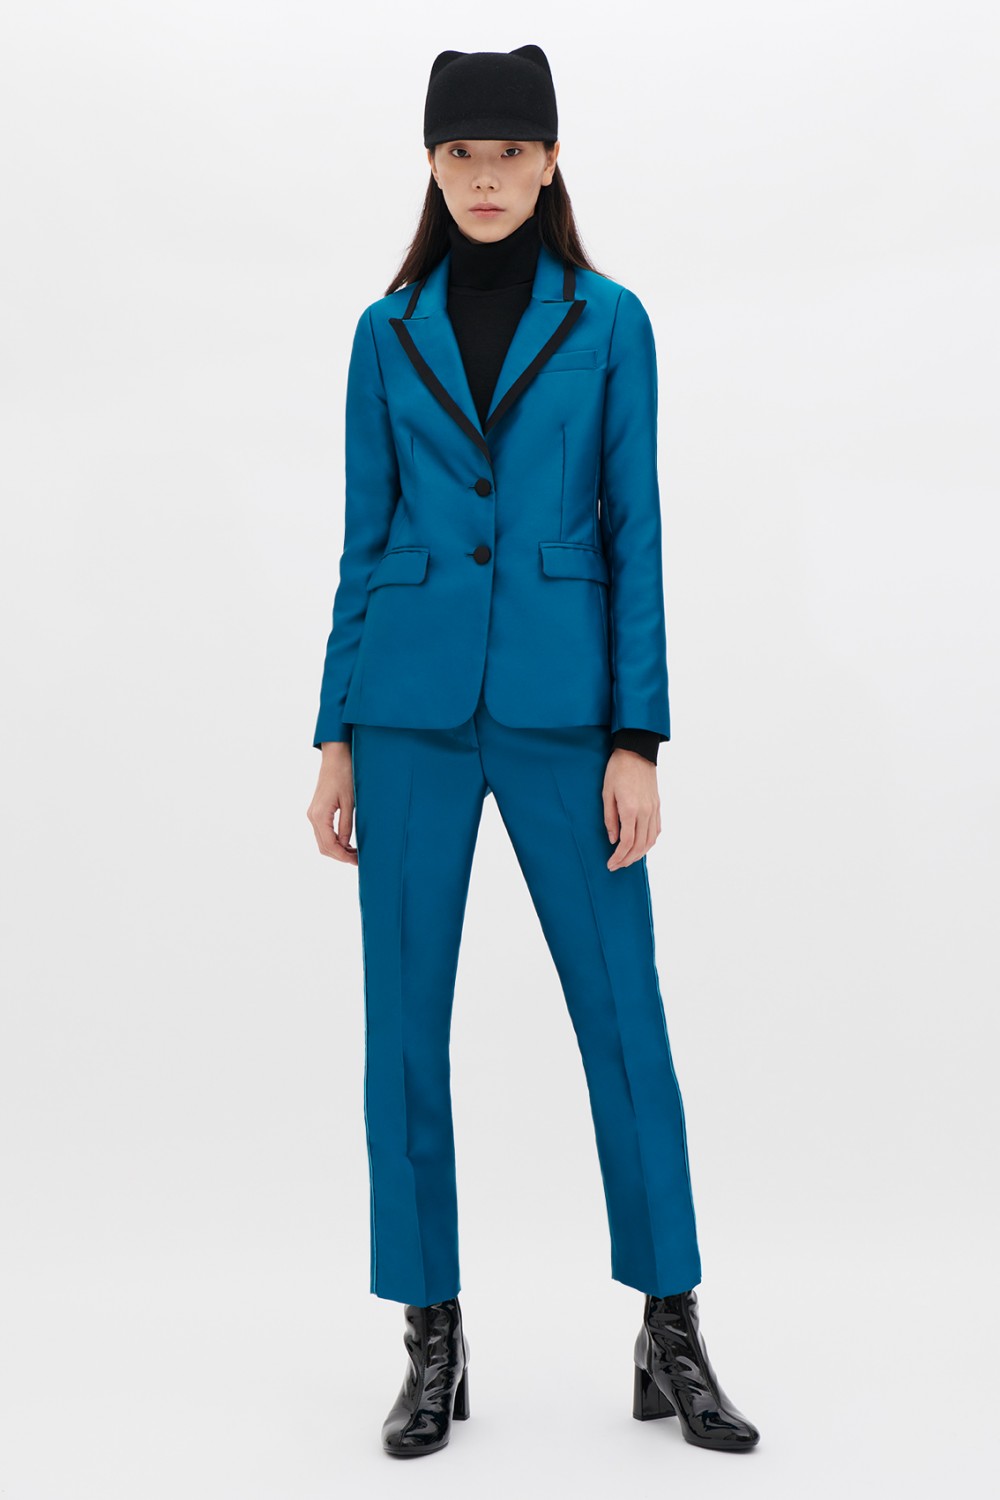 Turquoise satin jacket and trousers